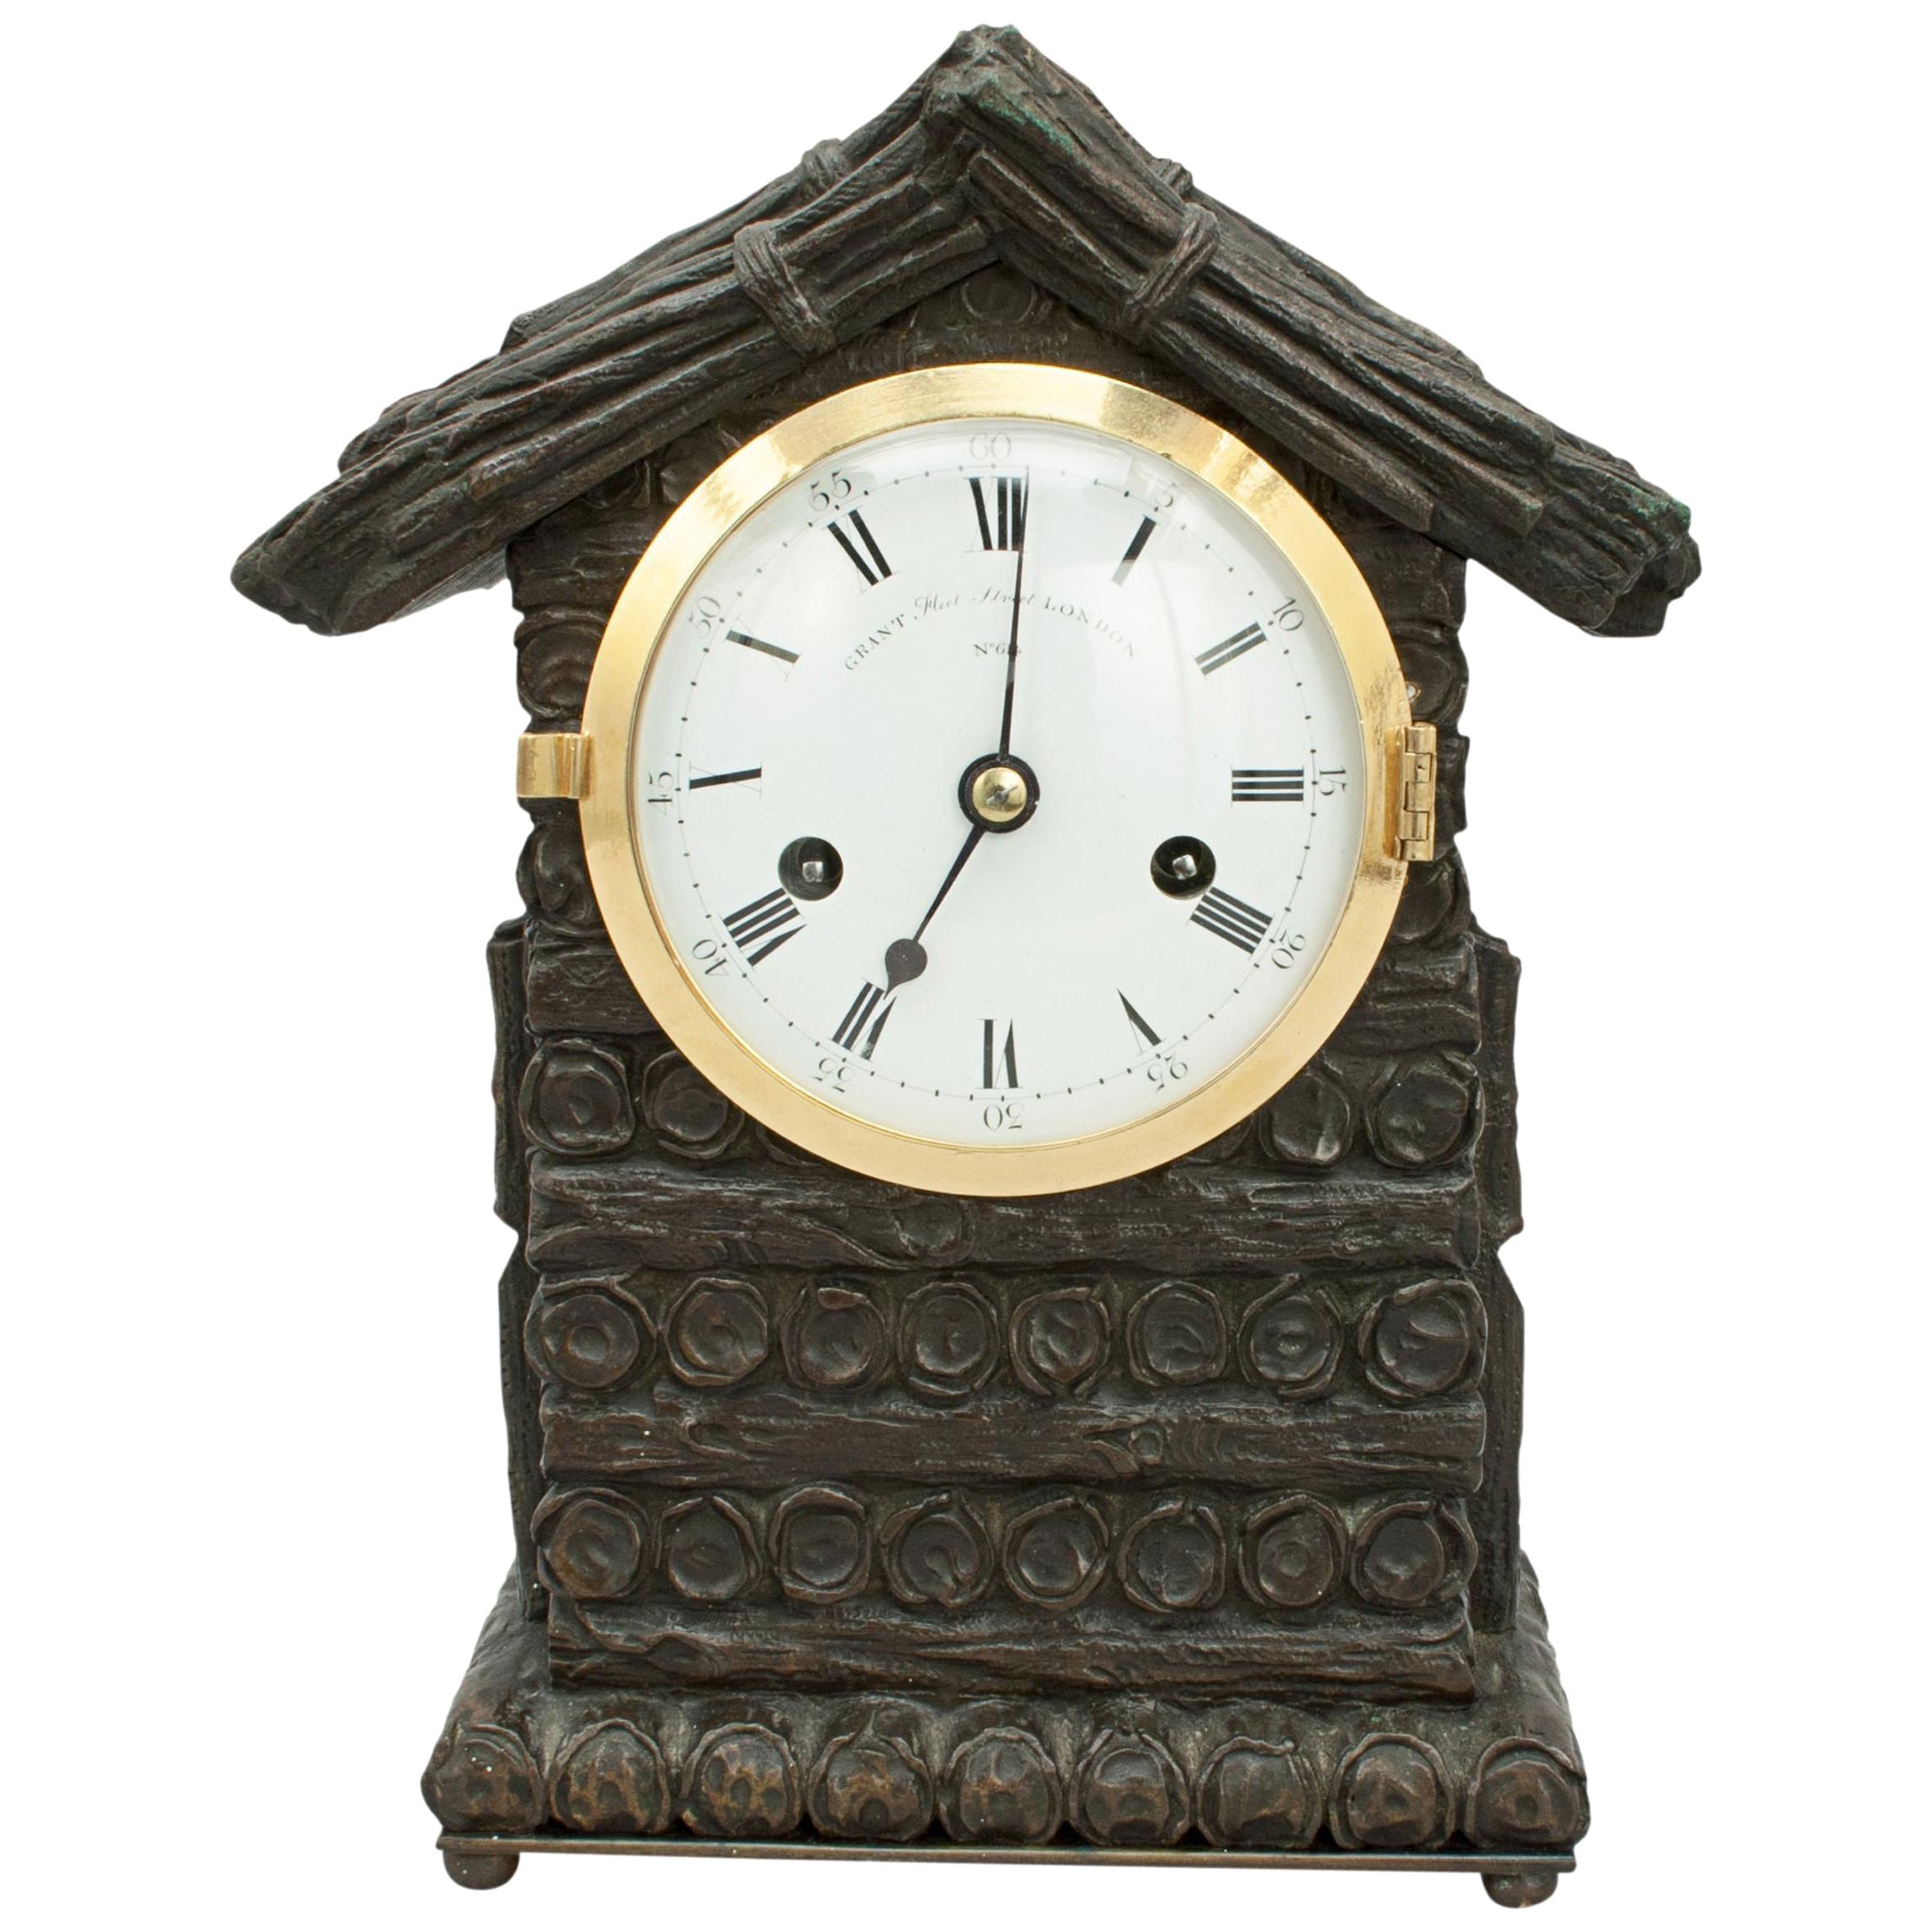 Antique Mantel Clock by Grant, Black Forest Type Design For Sale